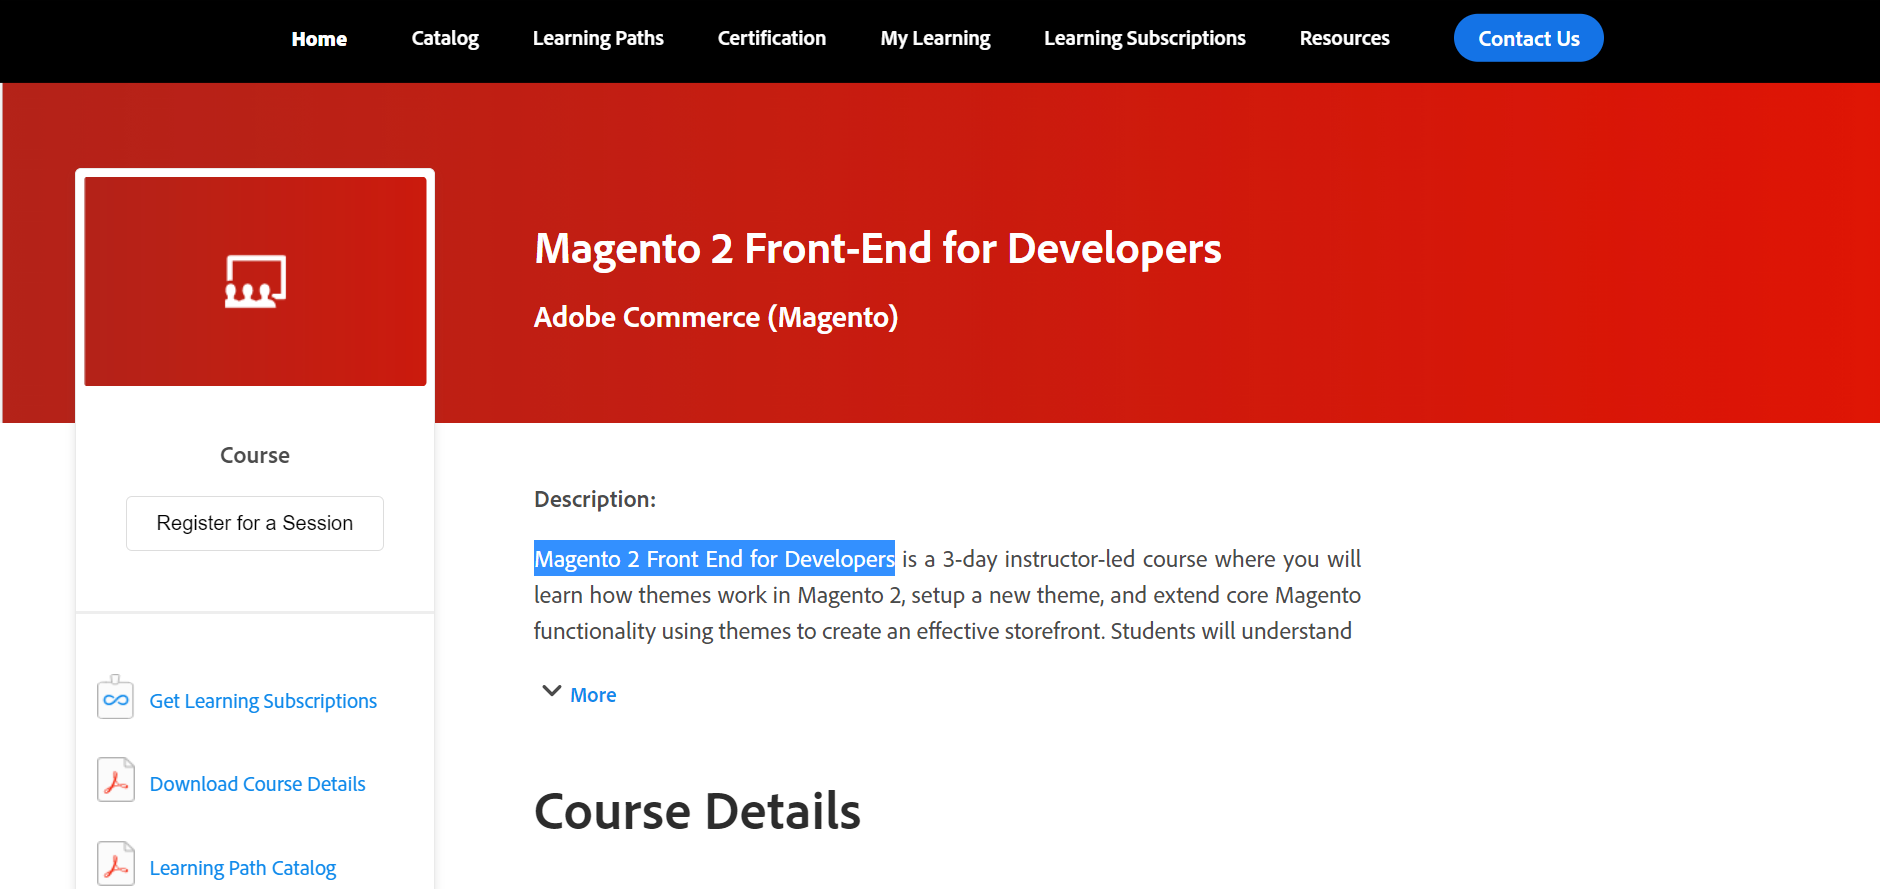 The Magento 2 Front End for Developers course